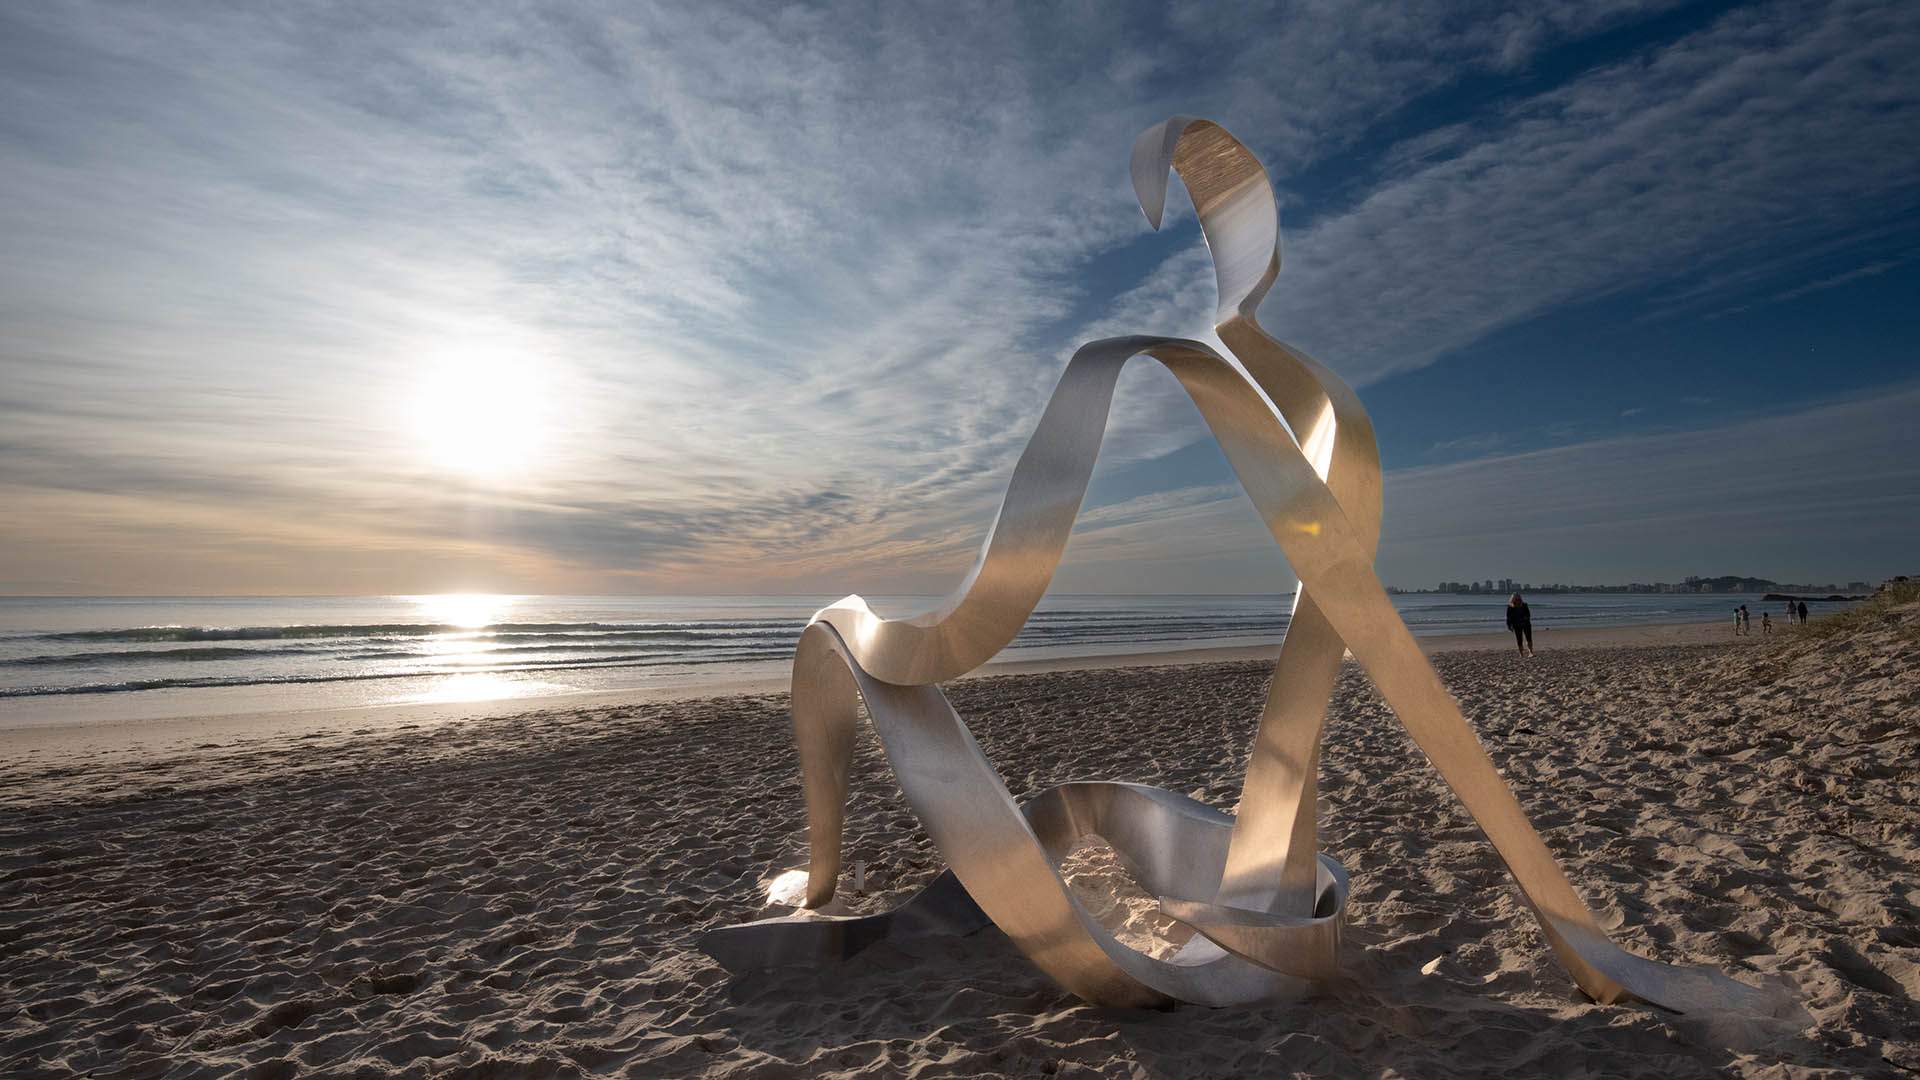 Swell Sculpture Festival 2023 Is Turning Currumbin Beach Into an Outdoor Gallery with 75-Plus Huge Artworks